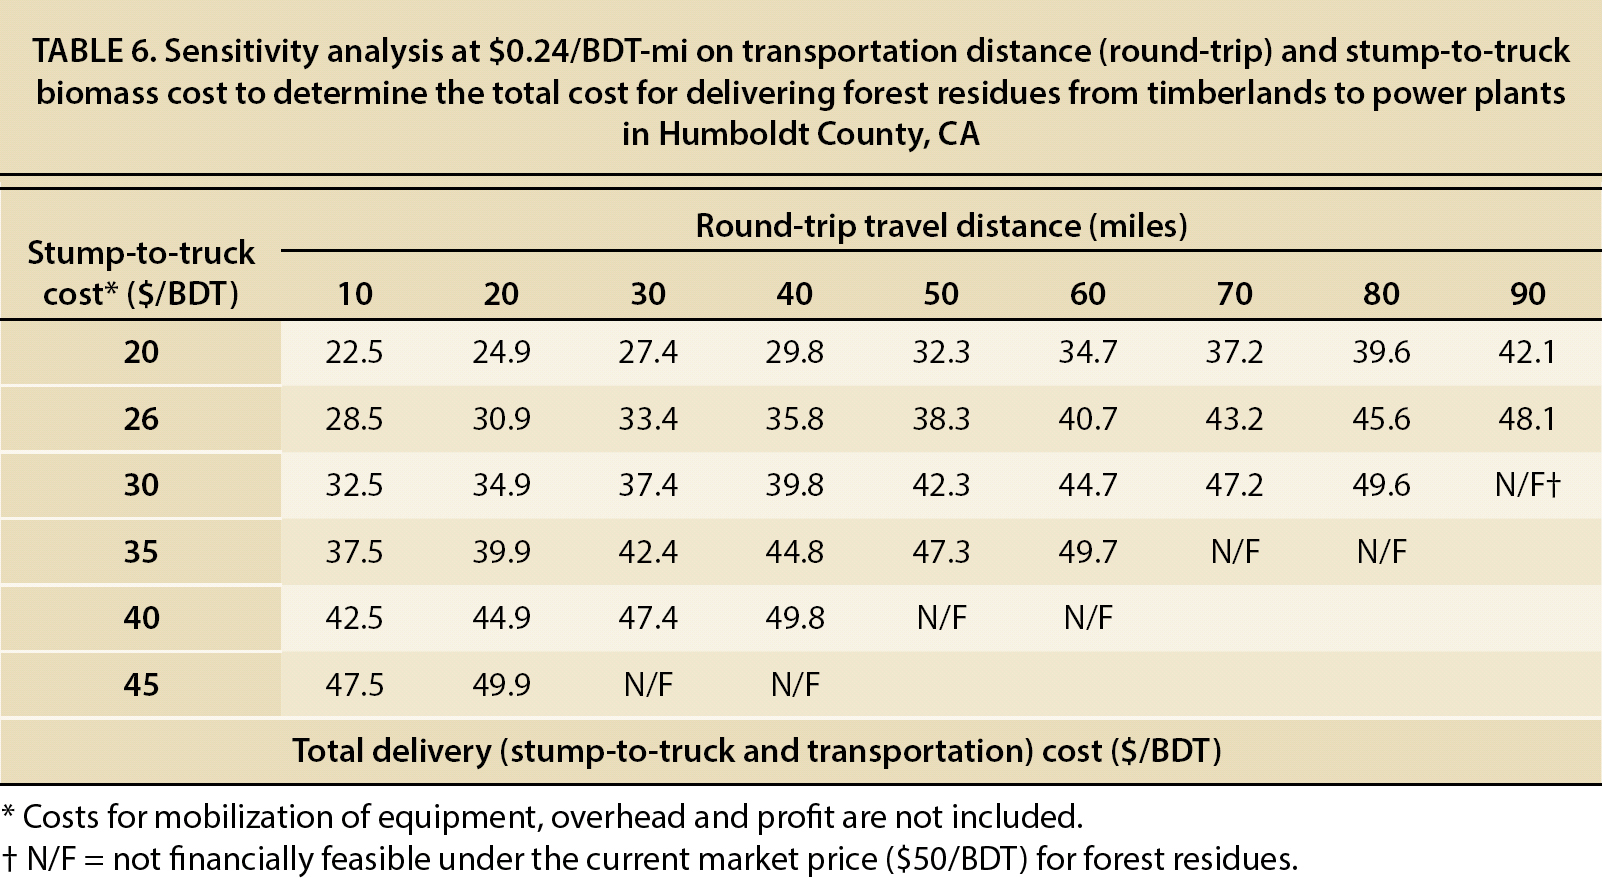 Sensitivity analysis at $0.24/BDT-mi on transportation distance (round-trip) and stump-to-truck biomass cost to determine the total cost for delivering forest residues from timberlands to power plants in Humboldt County, CA